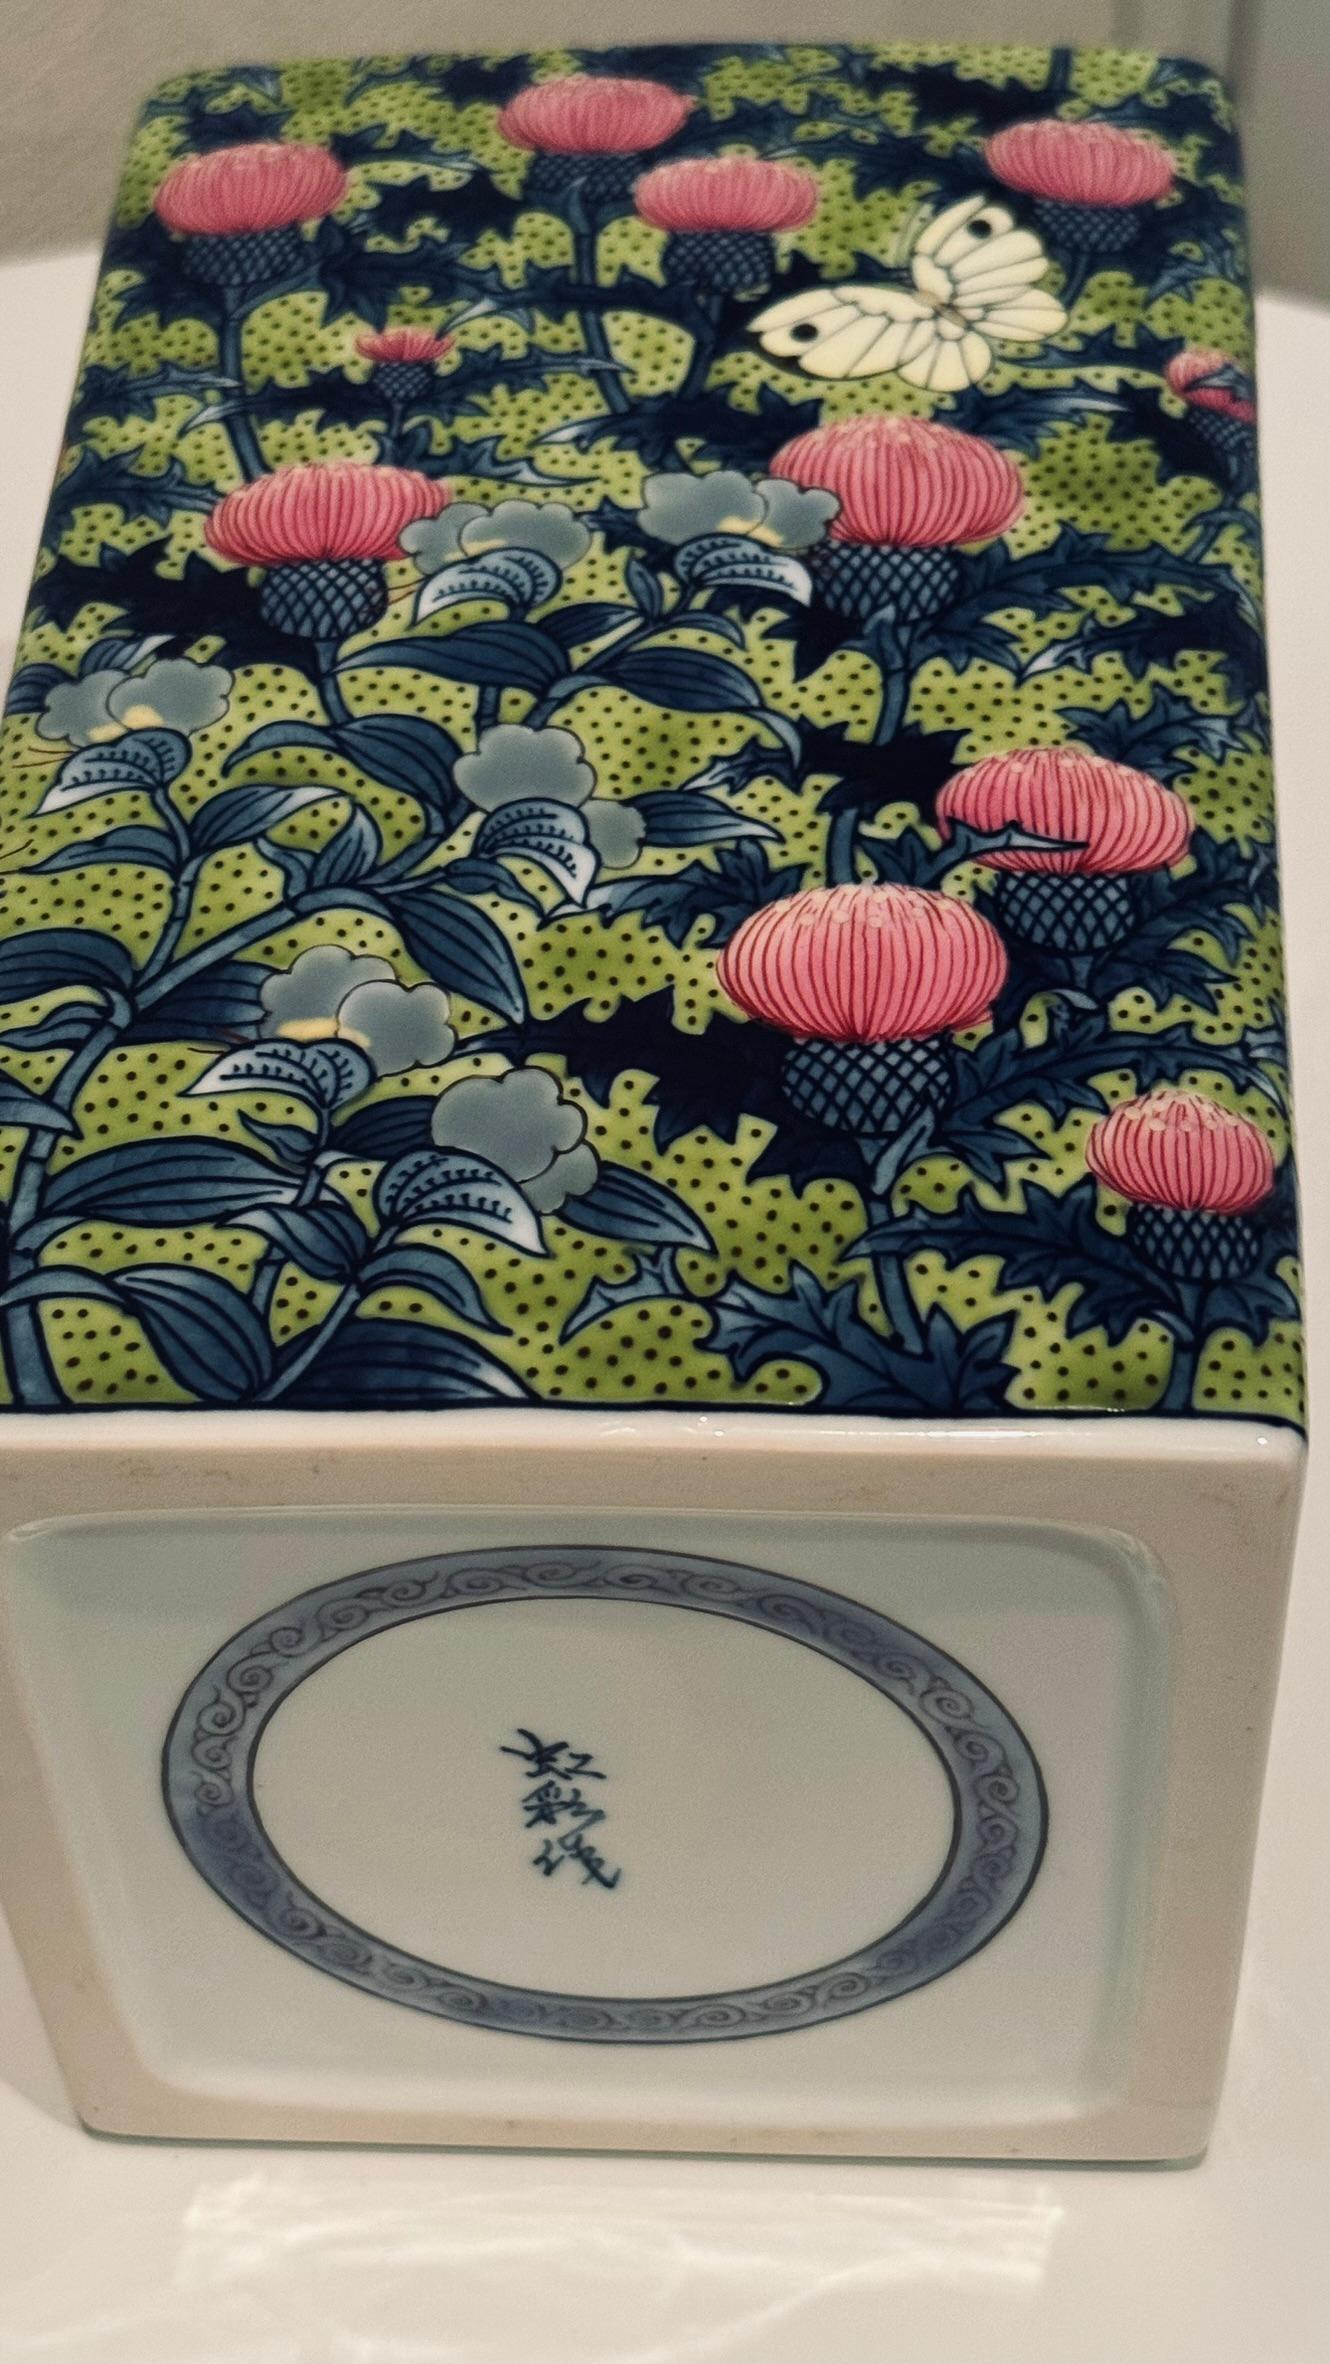 This extraordinary Japanese contemporary museum-quality decorative porcelain vase features a patch of thistle plants and flowers -- a traditional motif in Imari-Arita porcelain art. The occasional butterfly attracted to the early summer bloom adds a